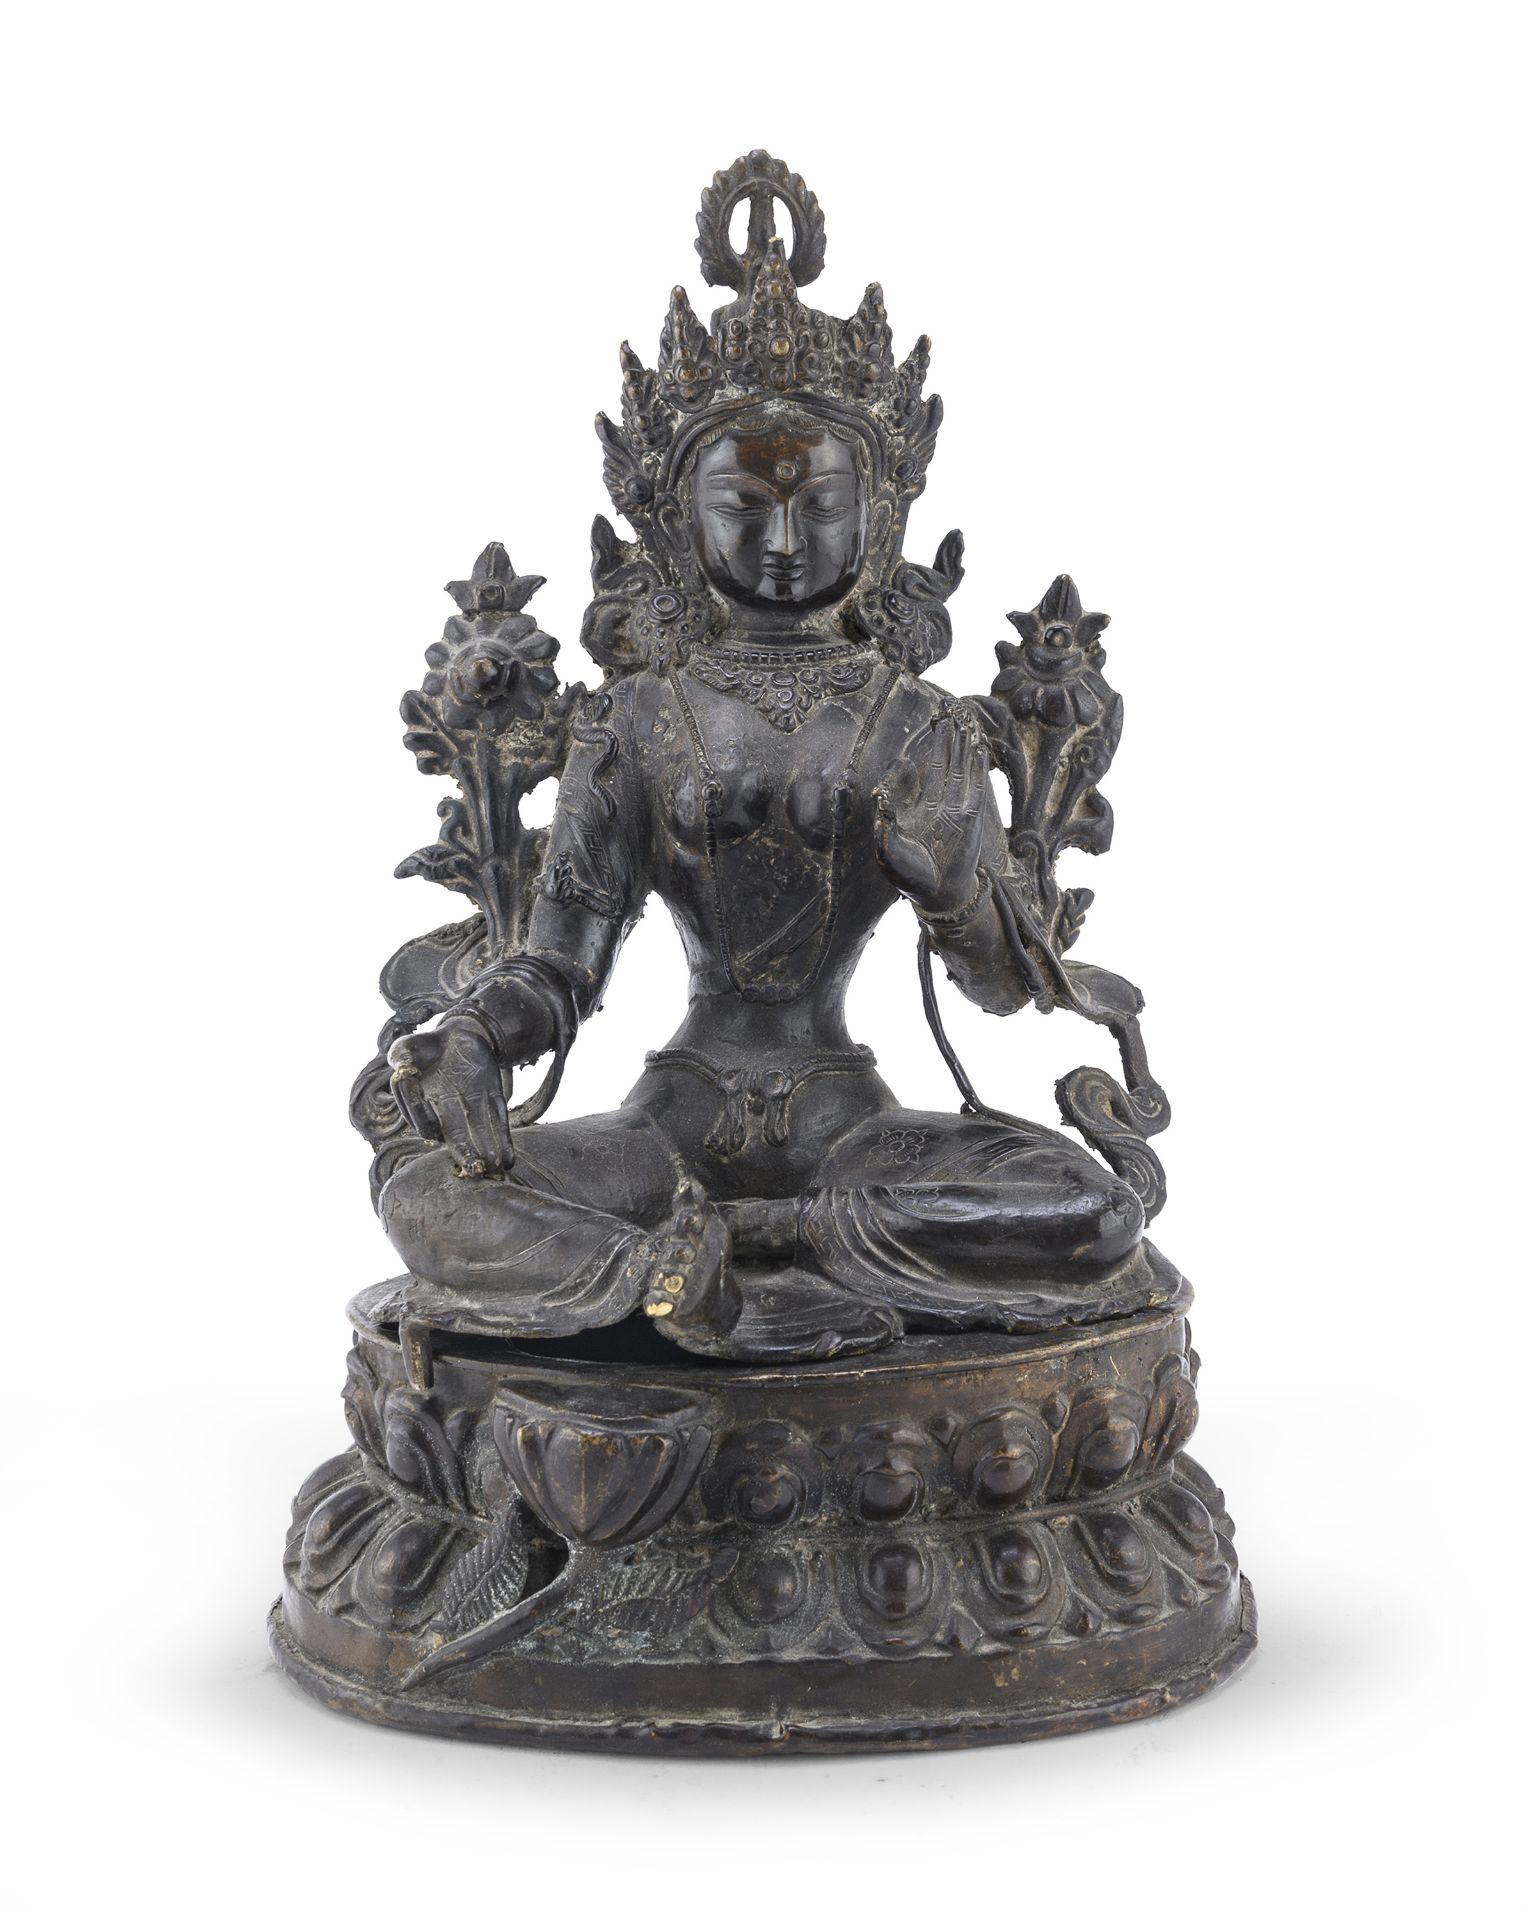 A CHINESE BRONZE SCULPTURE DEPICTING TARA LATE 19TH CENTURY.